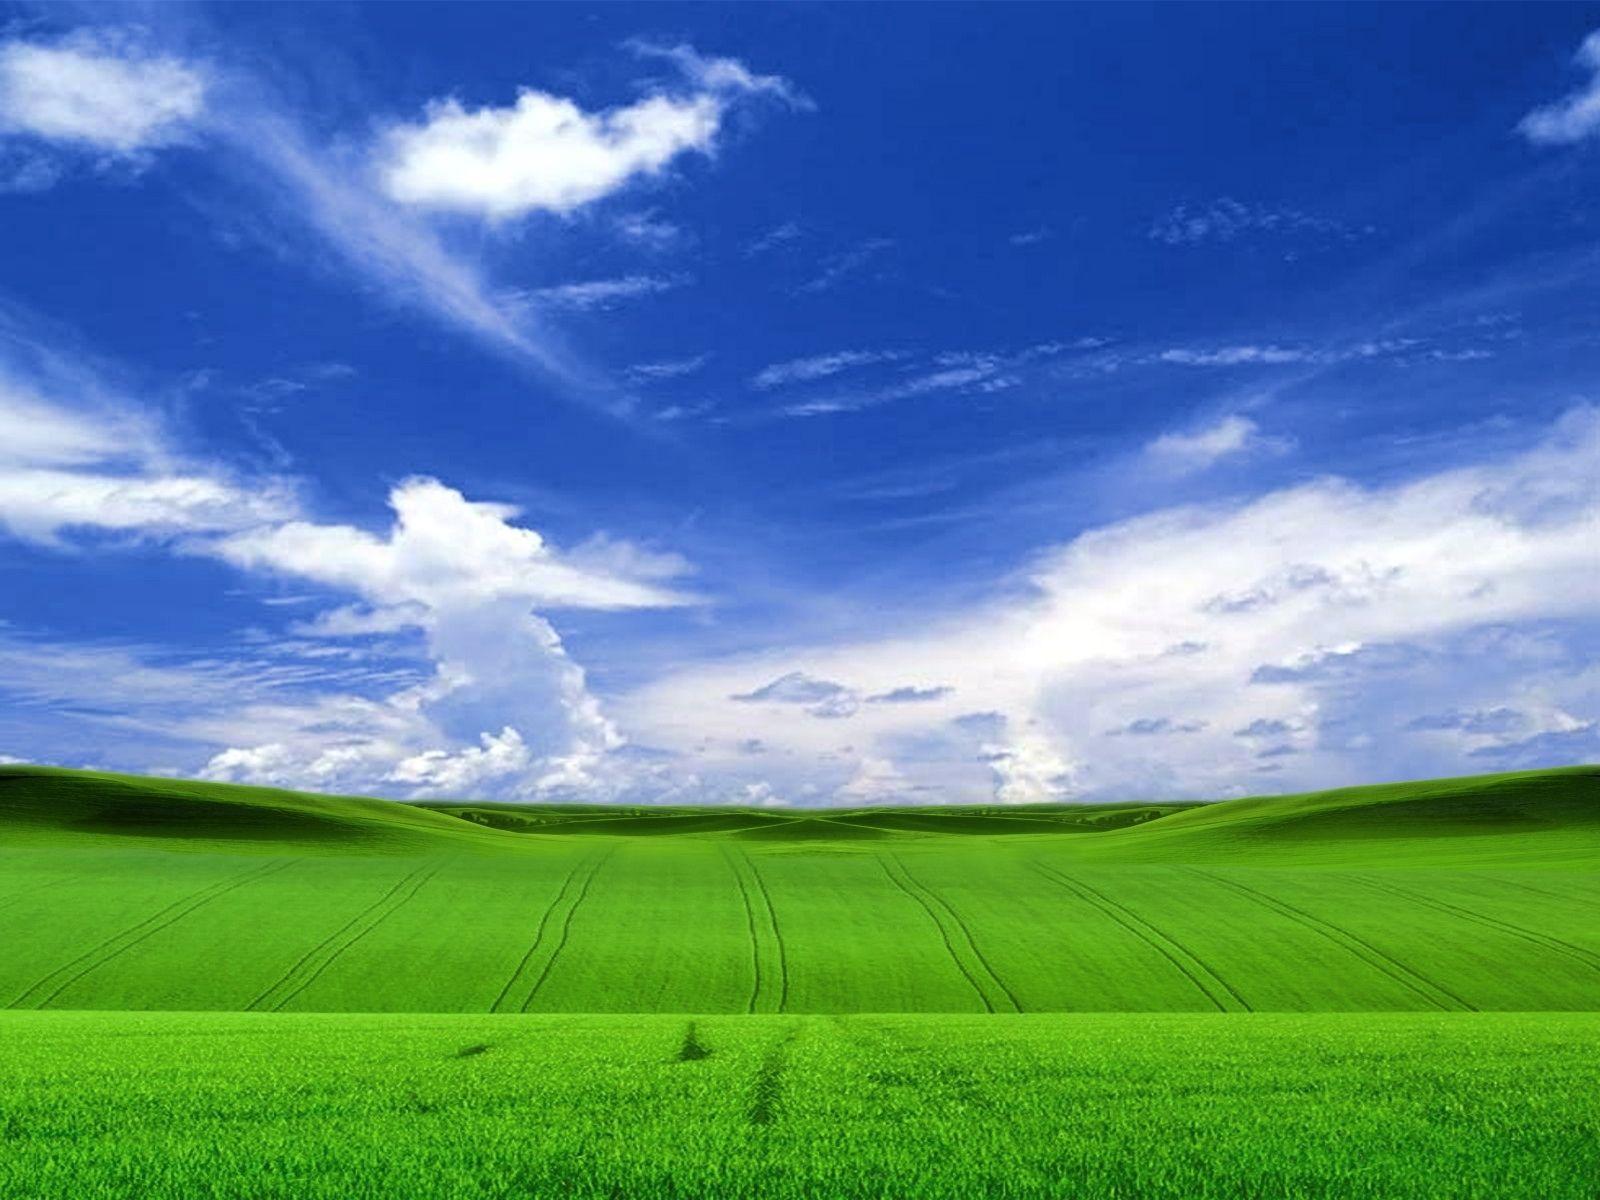 New HD Windows Xp Wallpaper FULL HD 1920×1080 For PC Background